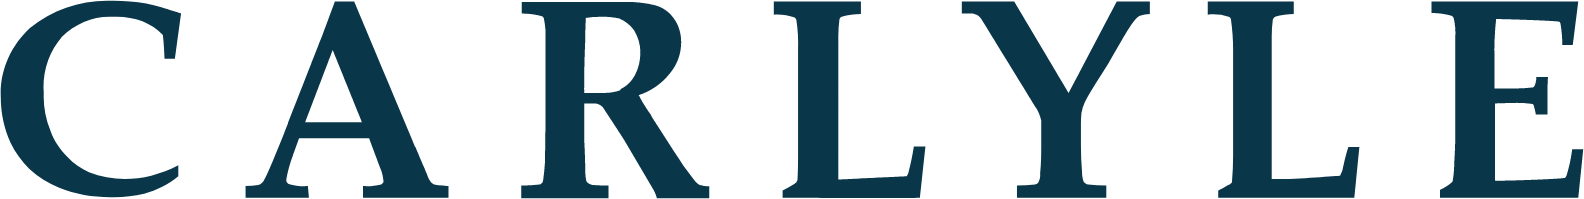 Carlyle Group logo large (transparent PNG)